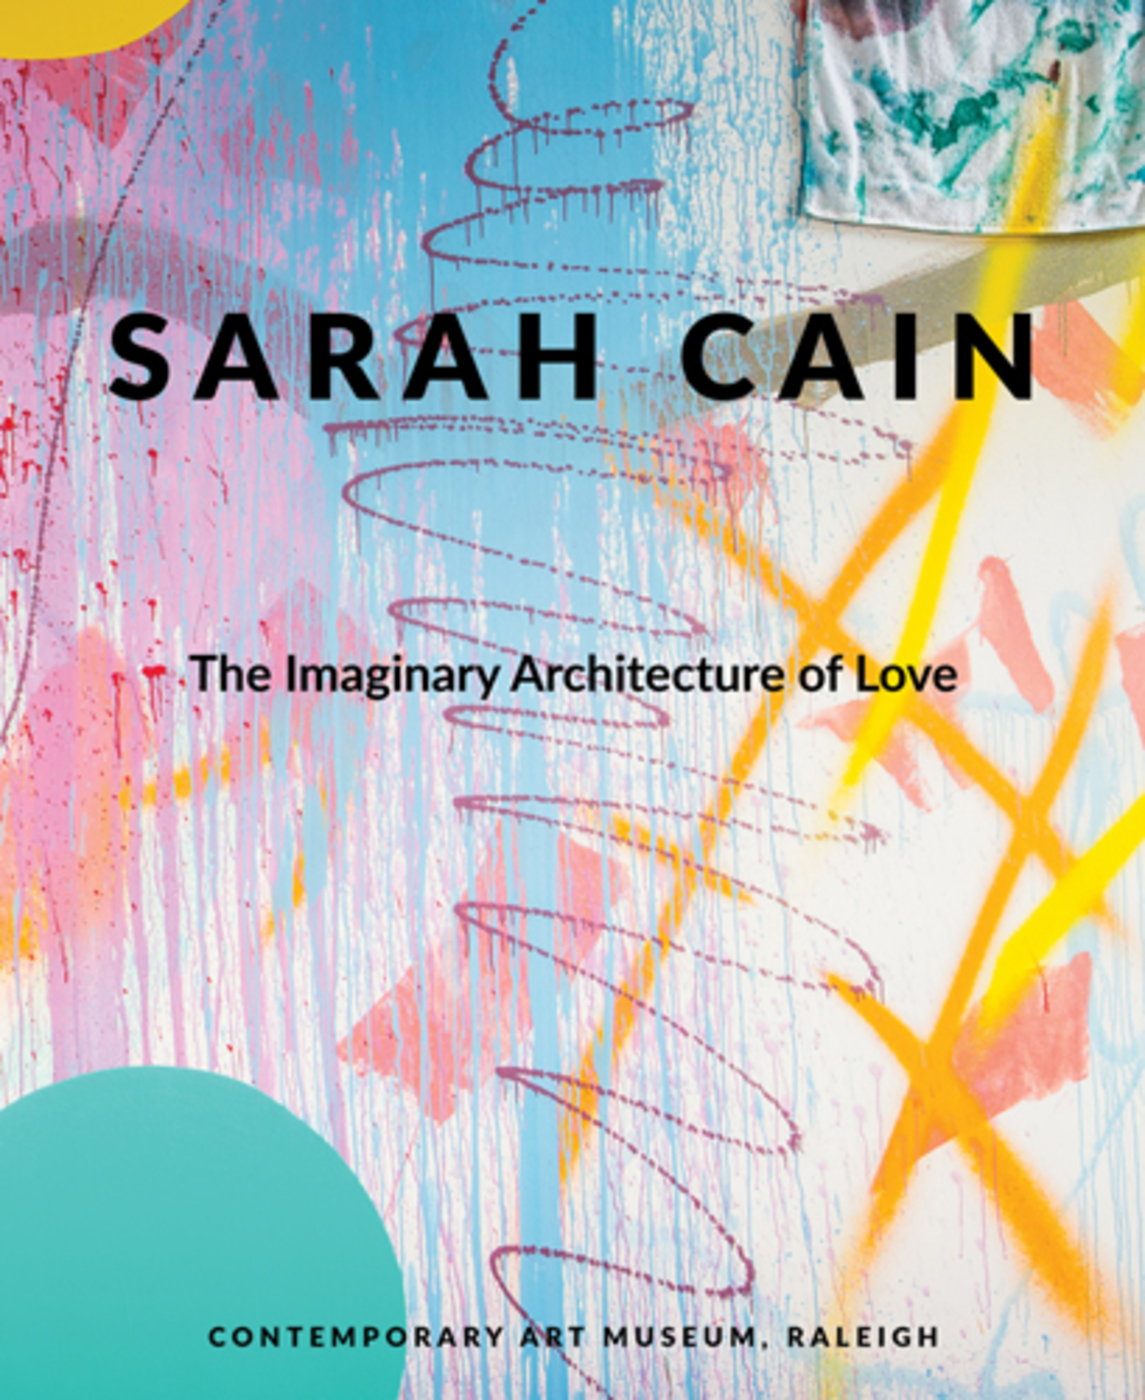 Sarah cain the imaginary architecture of love 25